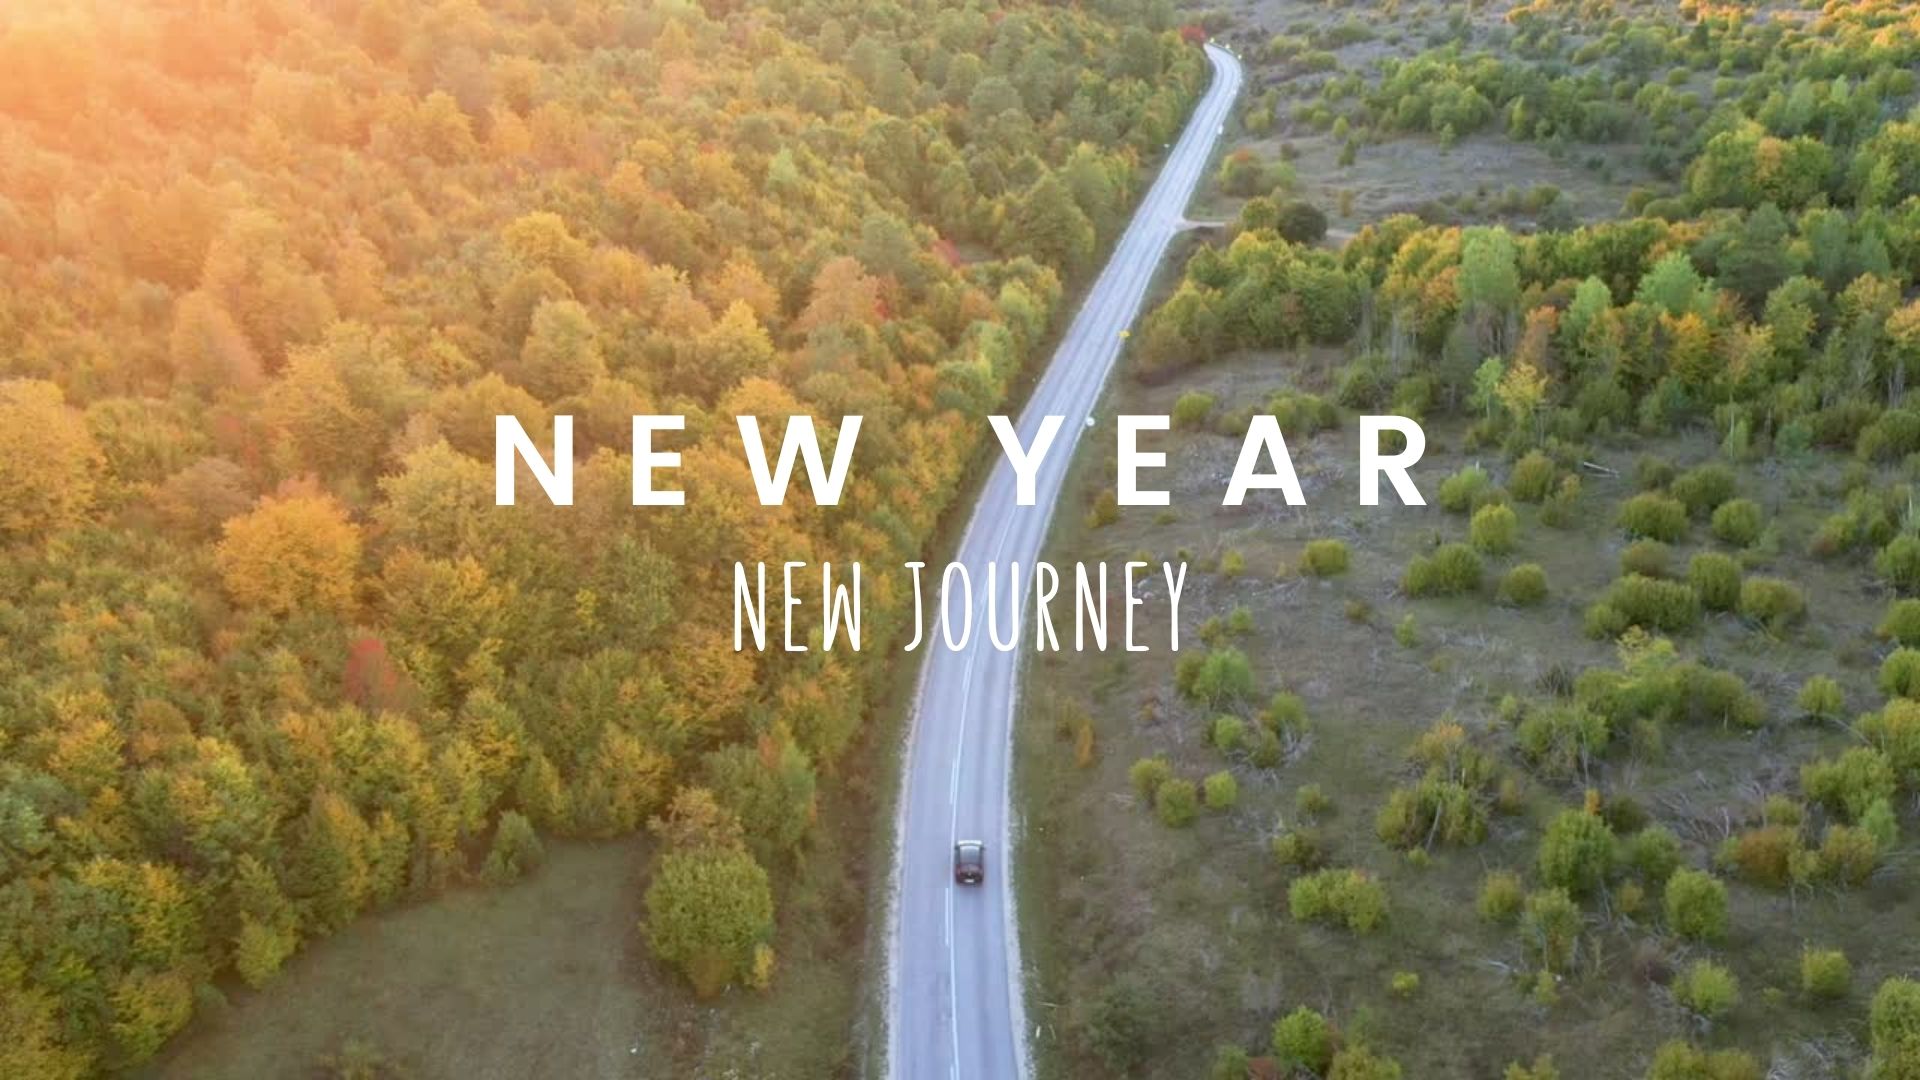 New Year - New Journey